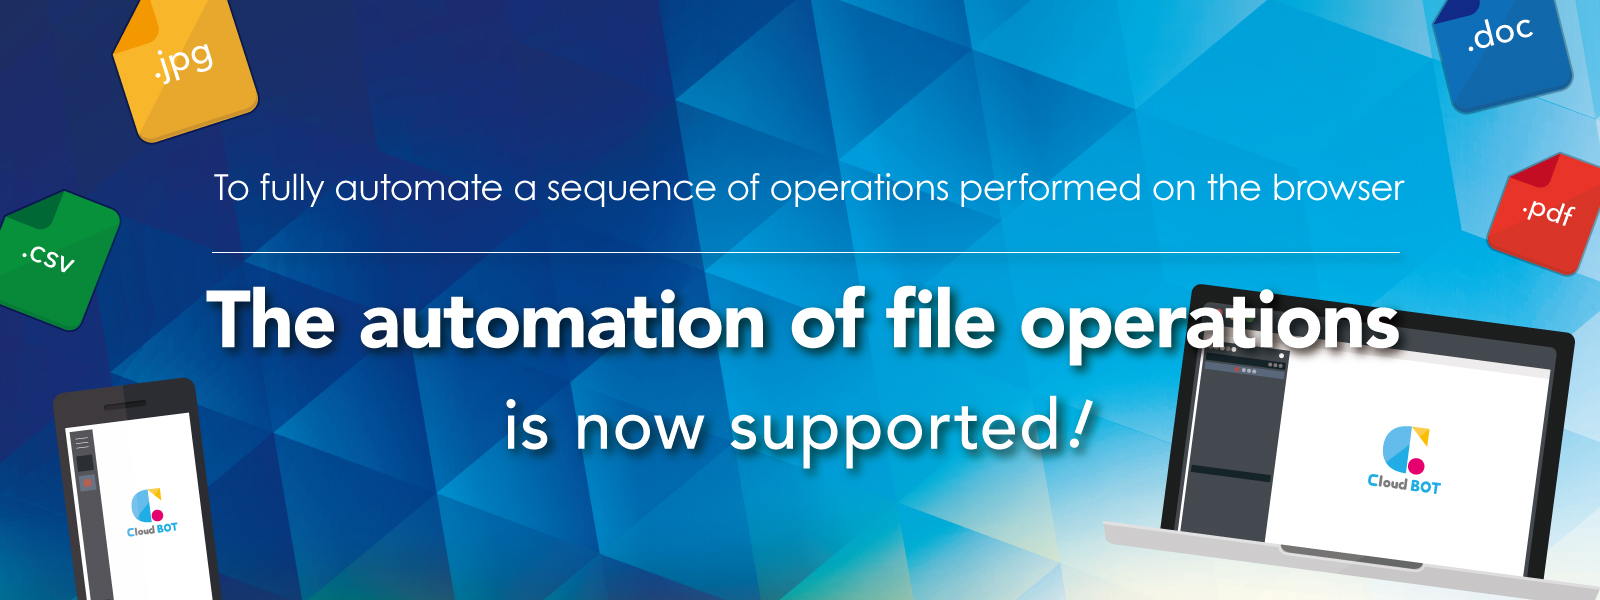 Main picture that describes the automation of file operations